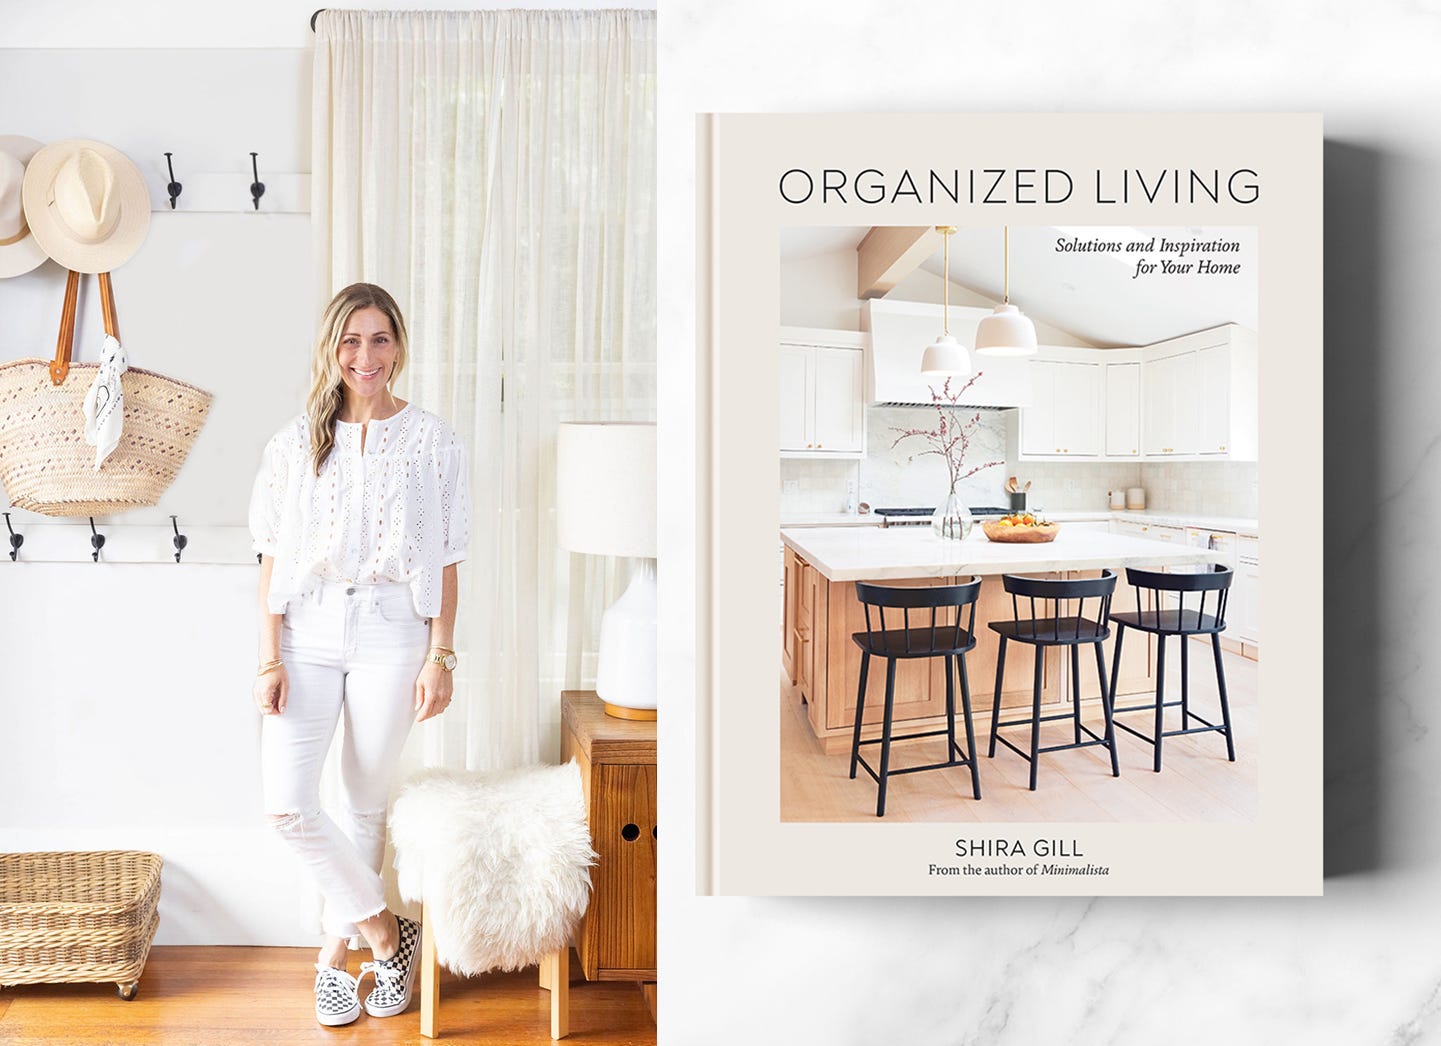 Author Shira Gill and the book cover of Organized Living